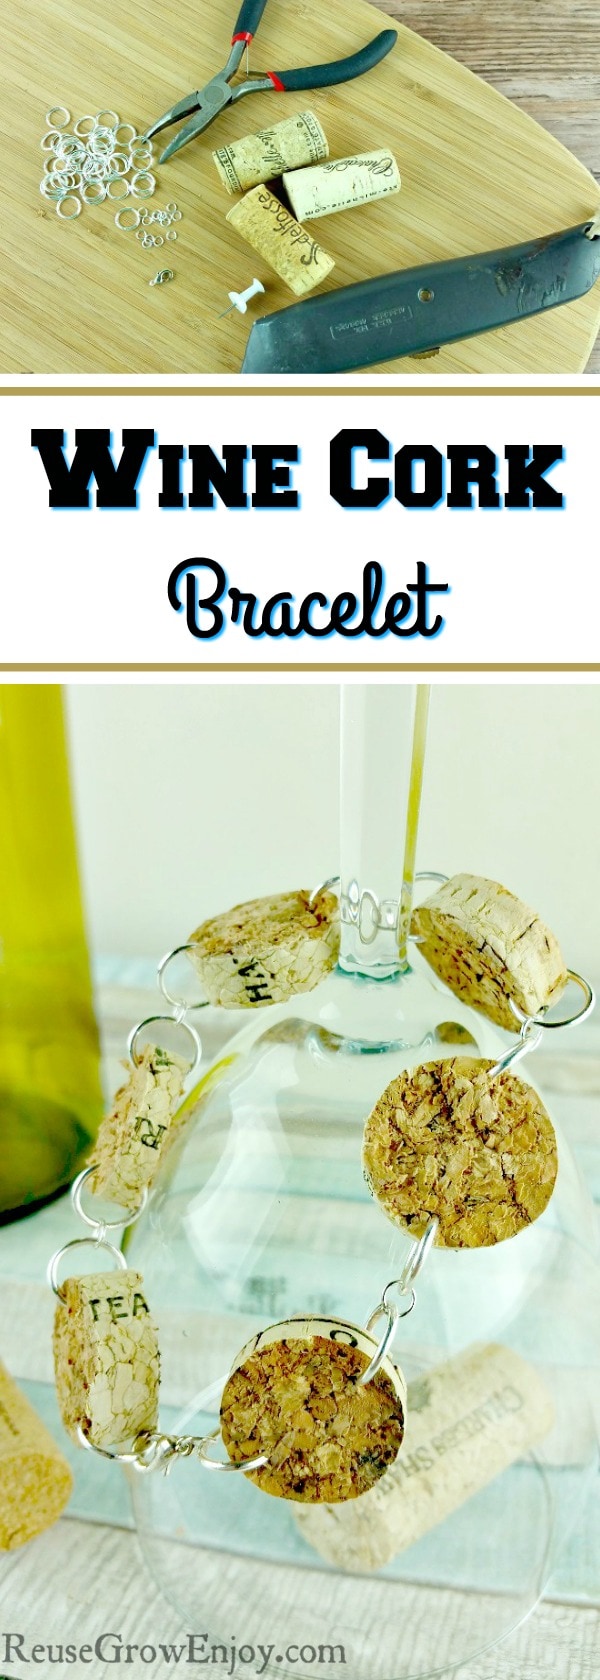 If you like to make your own jewelry, here is a pretty easy one to check out. It is a DIY bracelet made from upcycled wine corks.